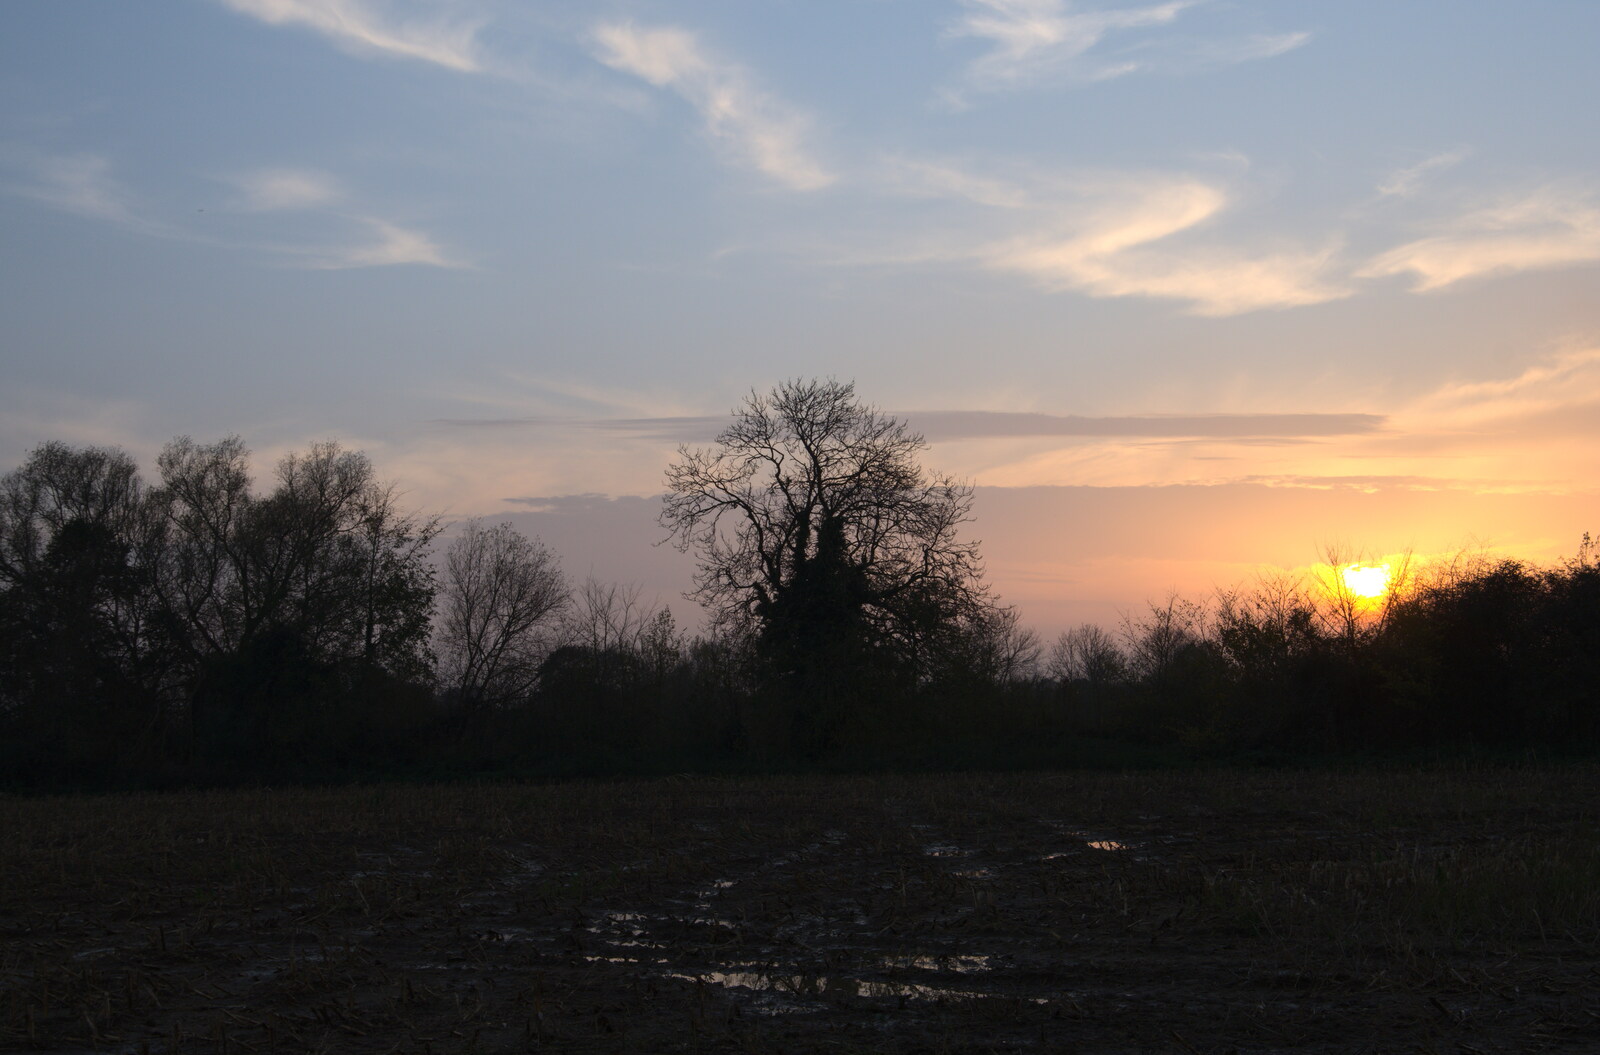 Sunset over the fields from To See the Hairy Pigs, Thrandeston, Suffolk - 7th November 2020